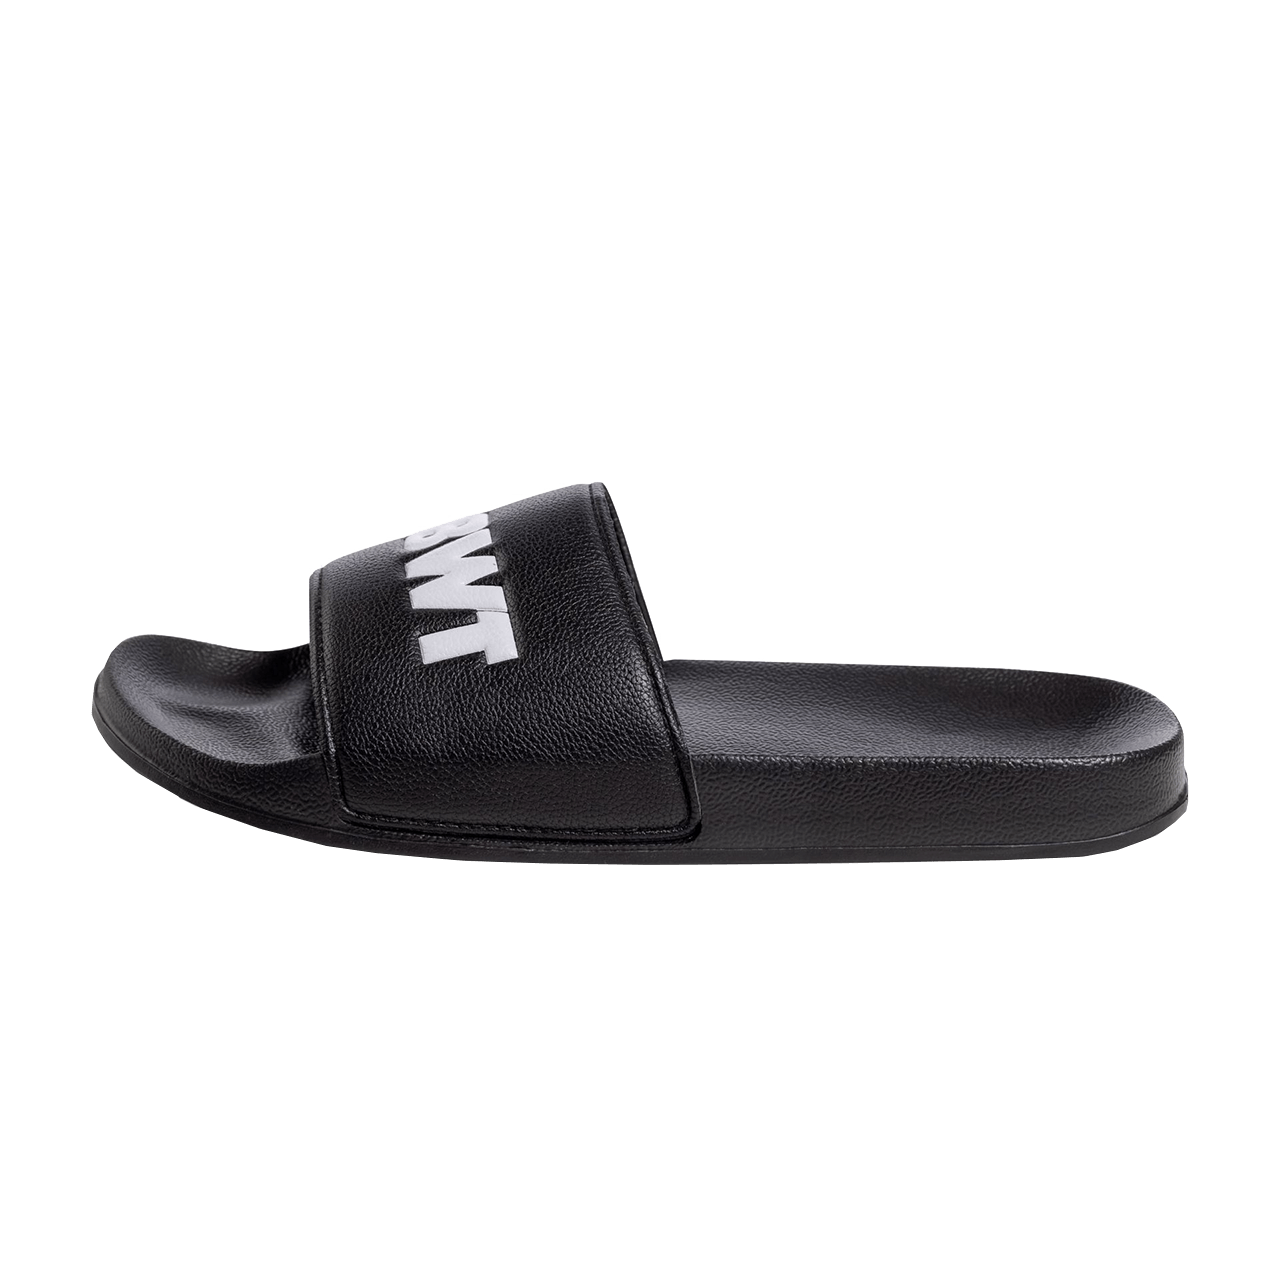 BWT One bath sandals in black with white BWT logo